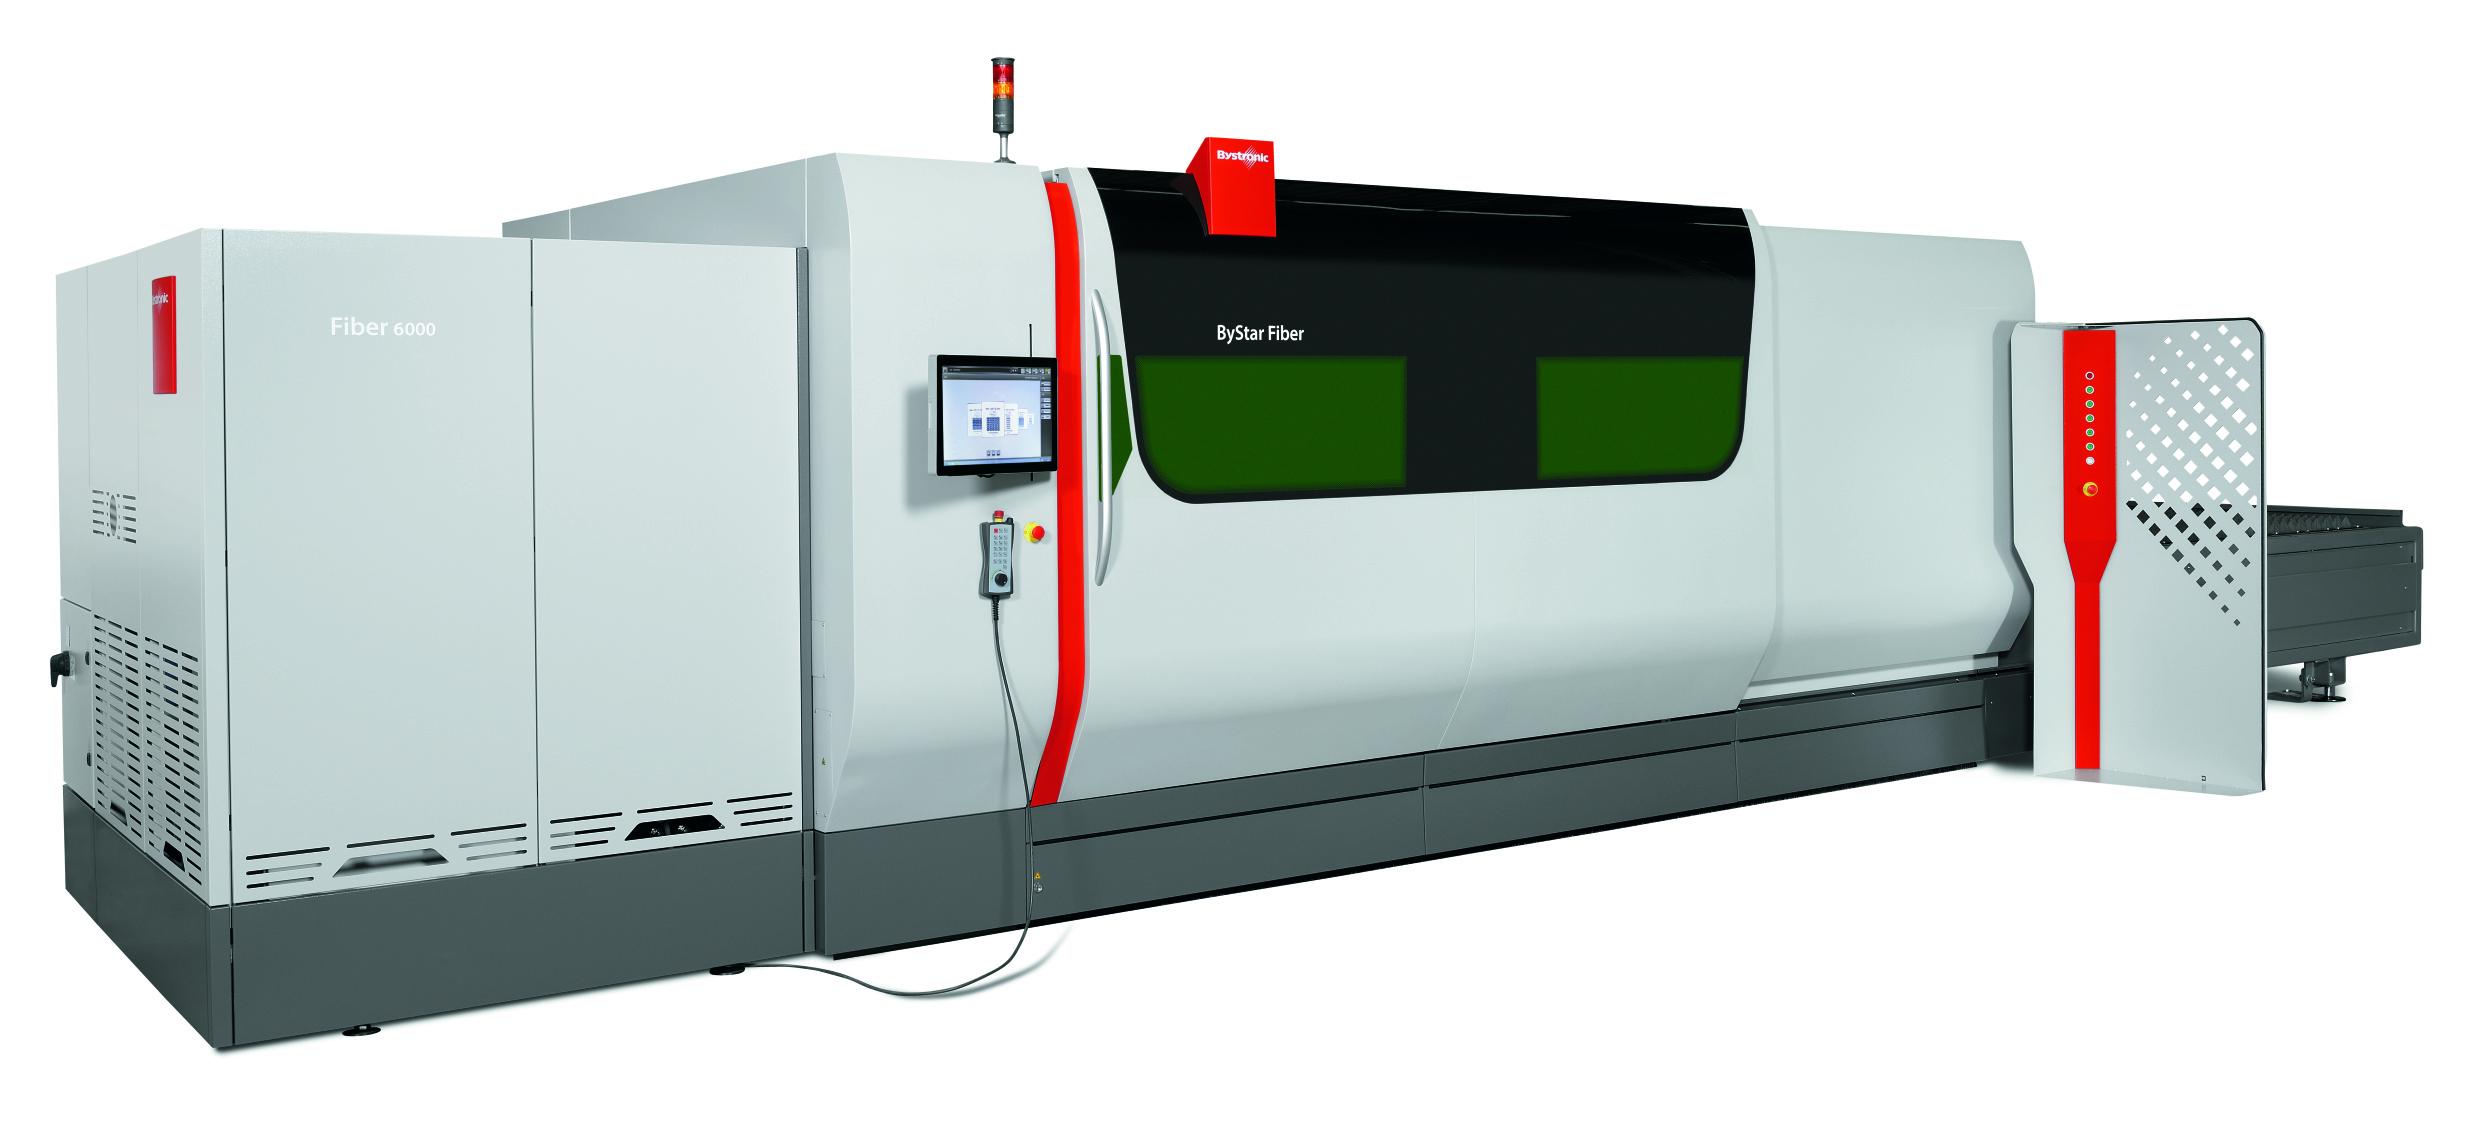 Bystronic to introduce new fiber laser house June 15-16